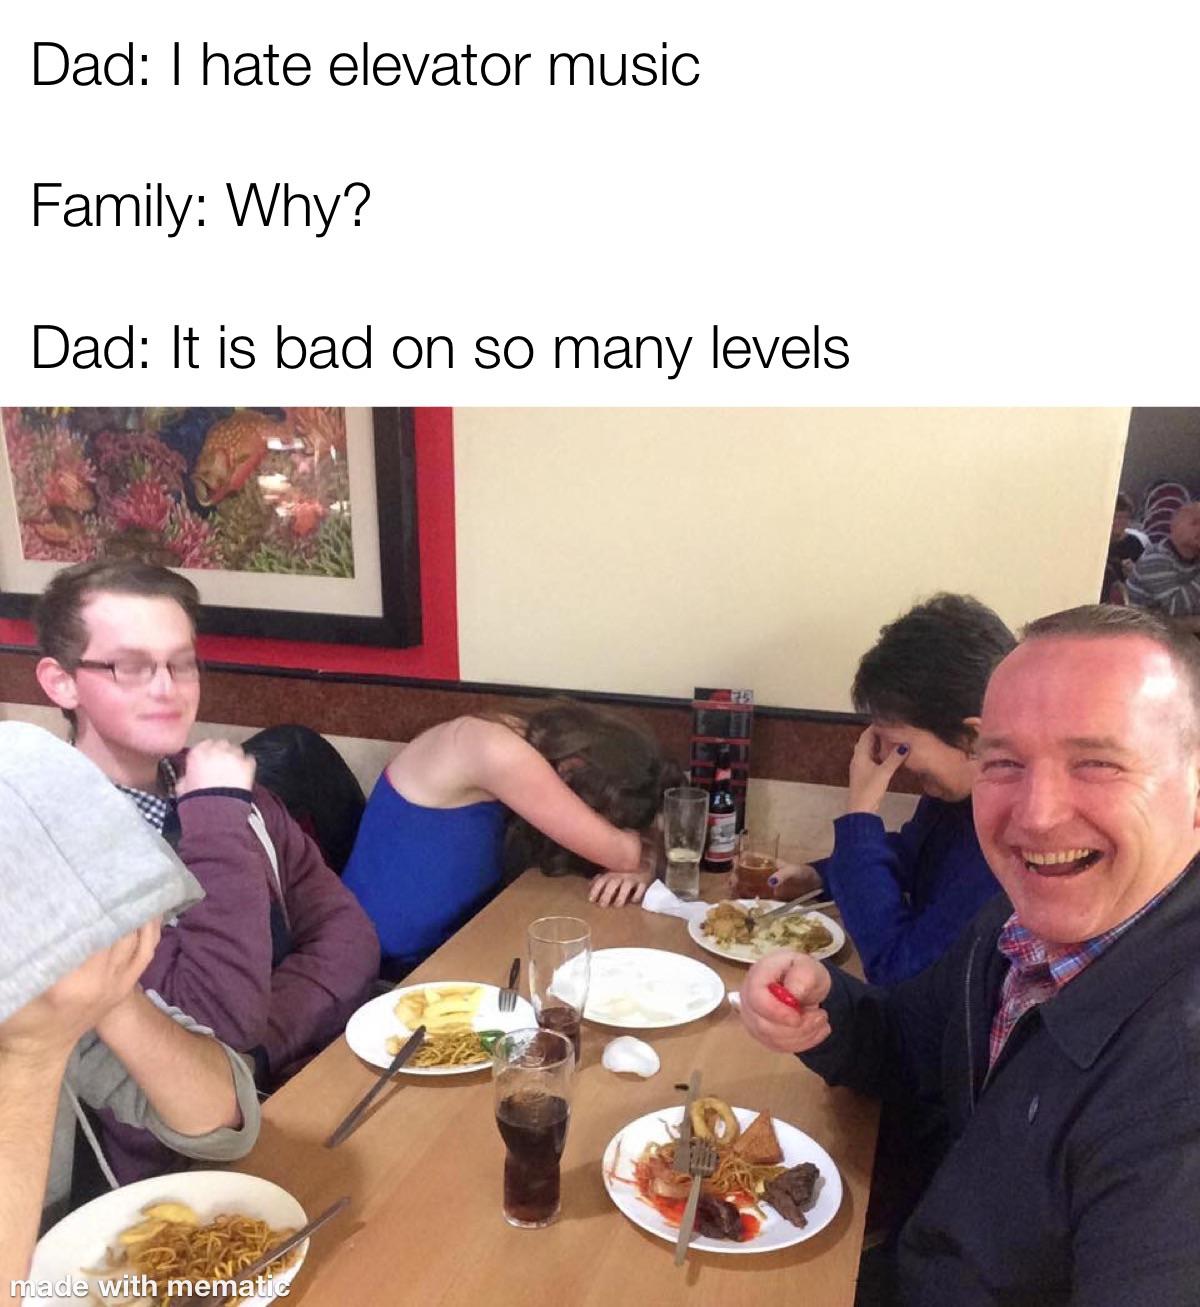 funny memes - dank memes - ladyfingers mentos - Dad I hate elevator music Family Why? Dad It is bad on so many levels made with mematic